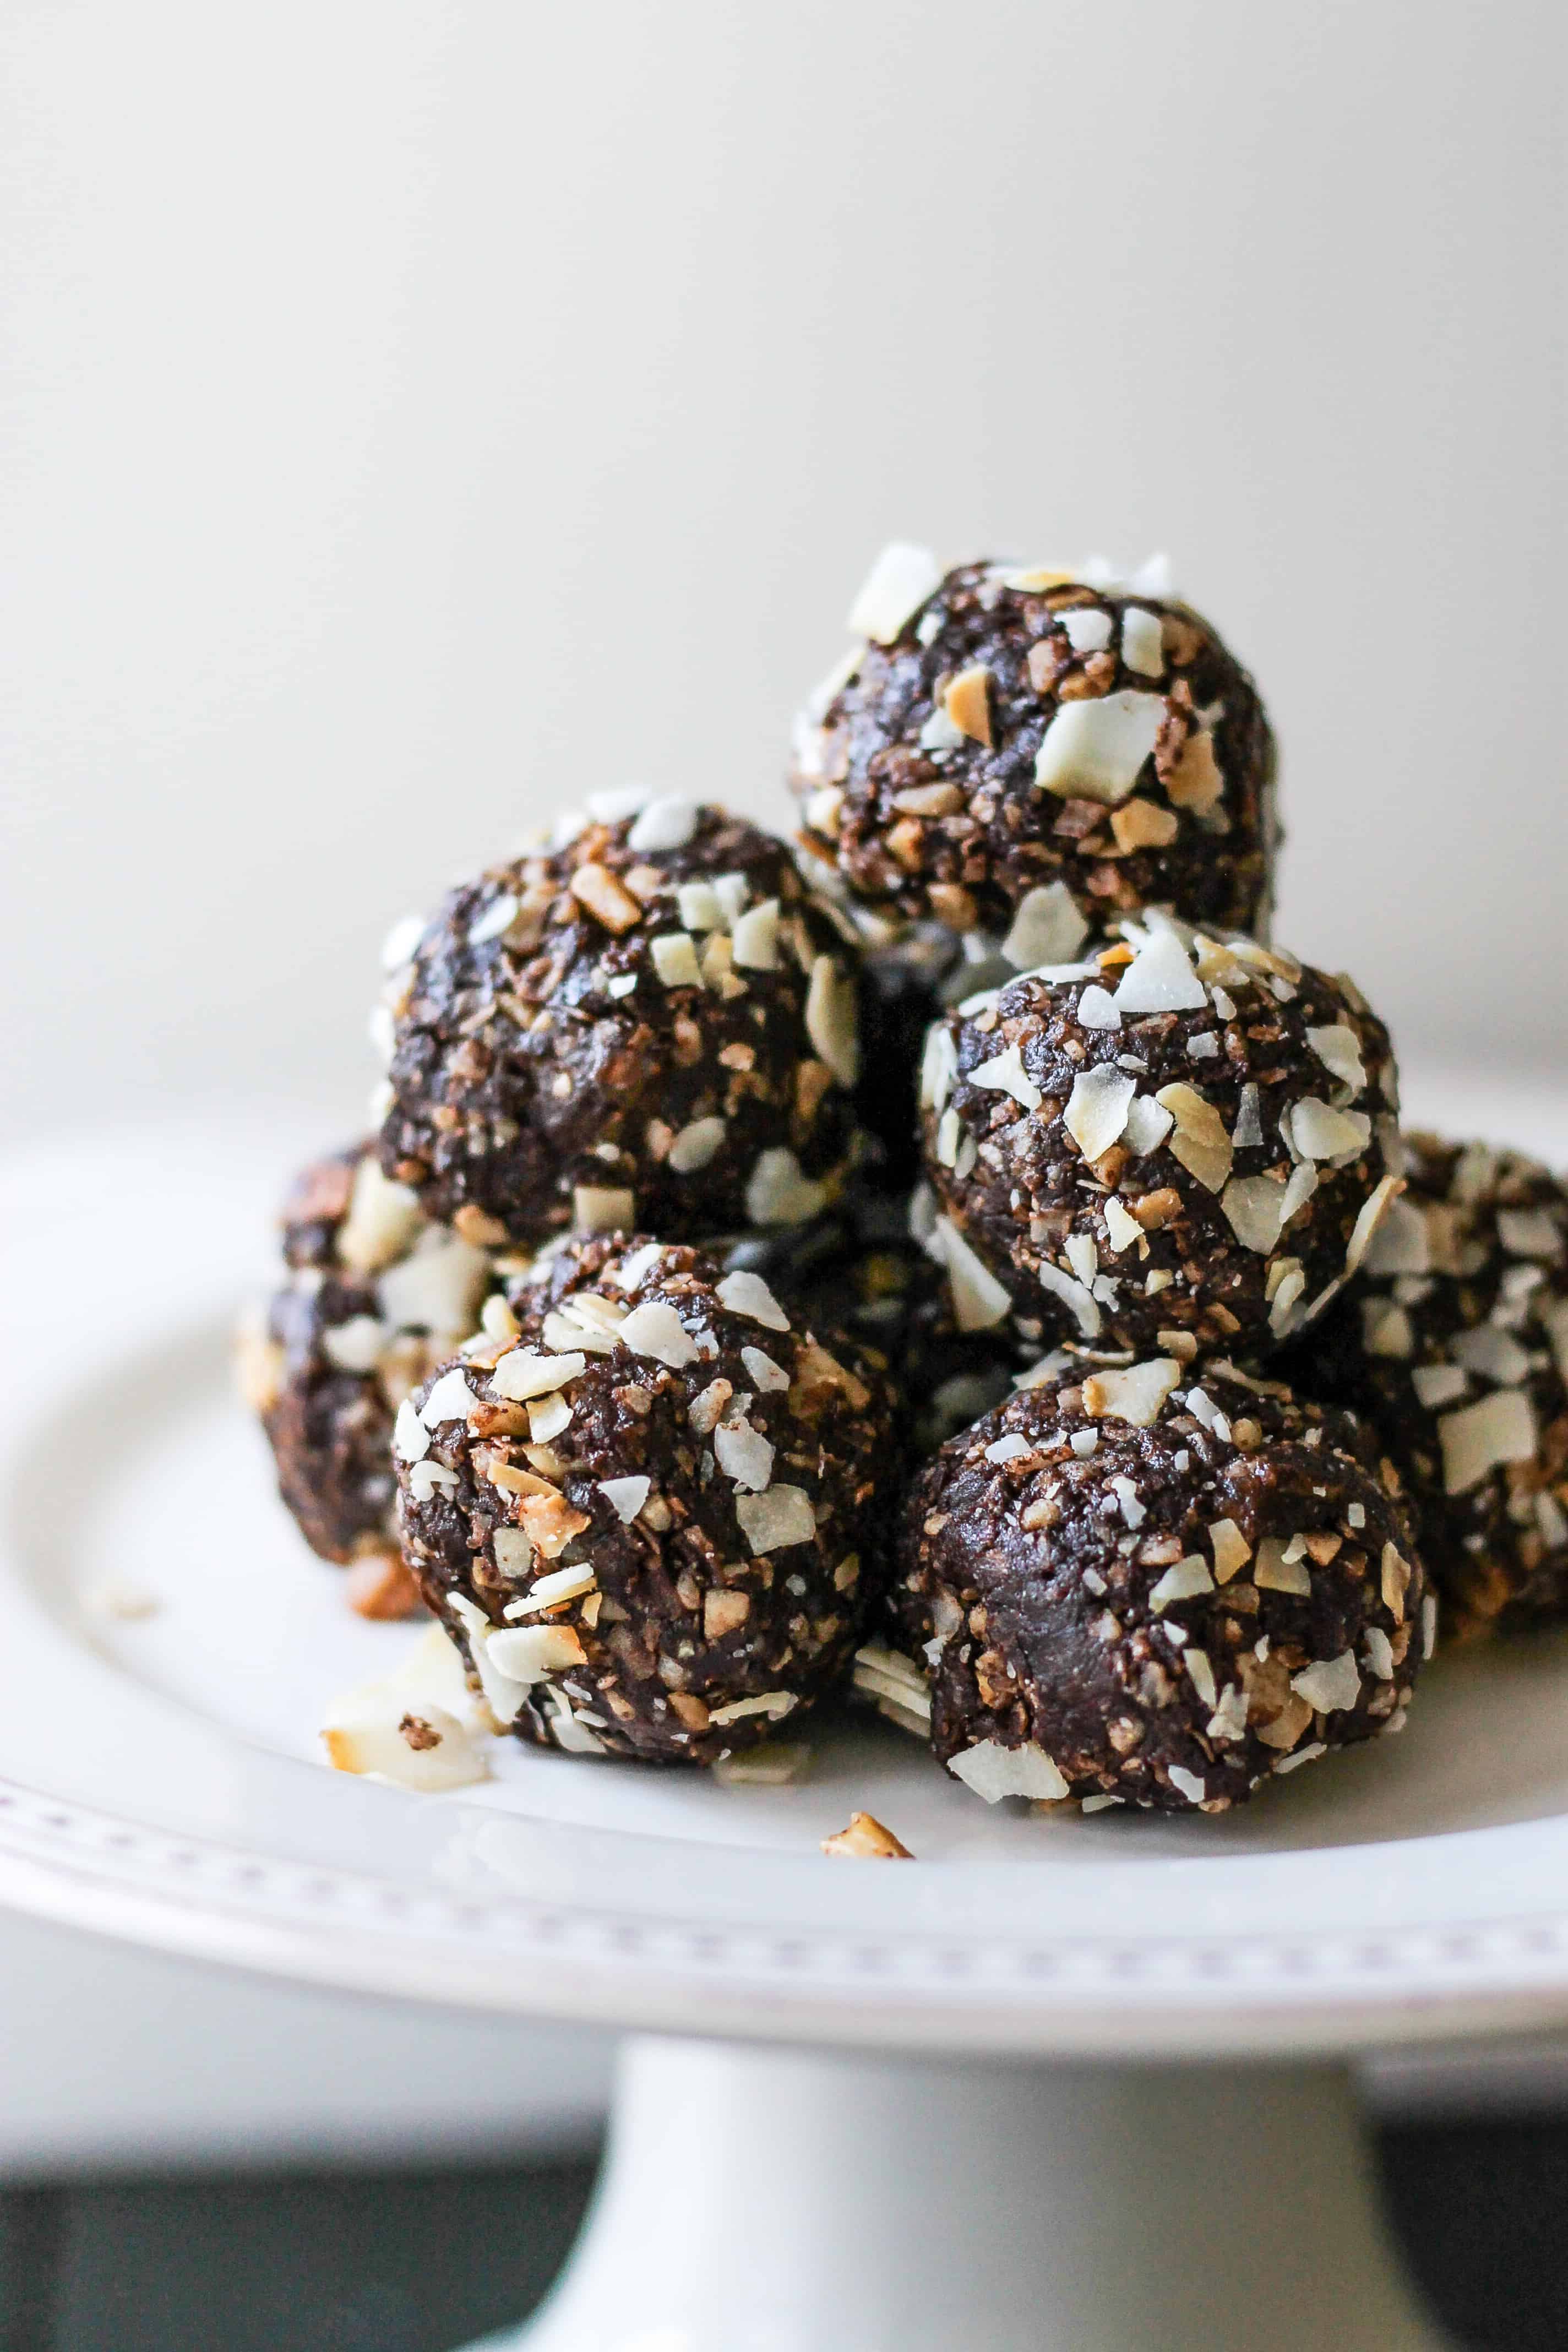 Need an afternoon "pick-me-up" without over-indulging? #Powerballs #Paleo #Whole30